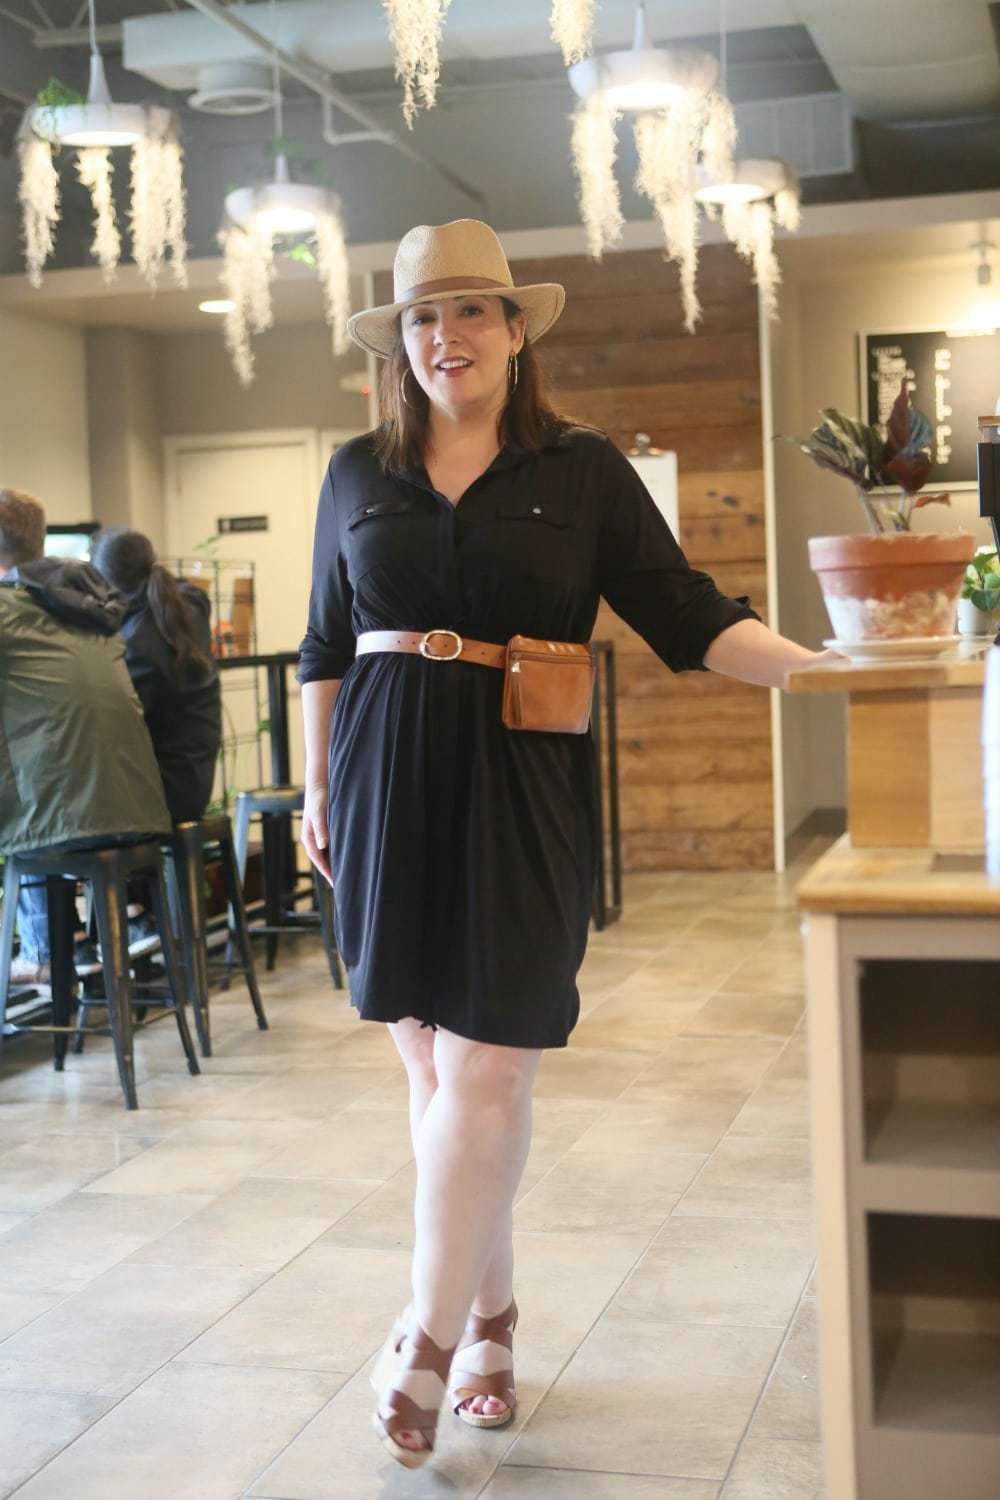 Black petite plus size shirtdress from NY Collection via Macy's as seen on Wardrobe Oxygen - Summer Travel Style with Macy's x NY Collection featured by popular Washington DC fashion blogger, Wardrobe Oxygen